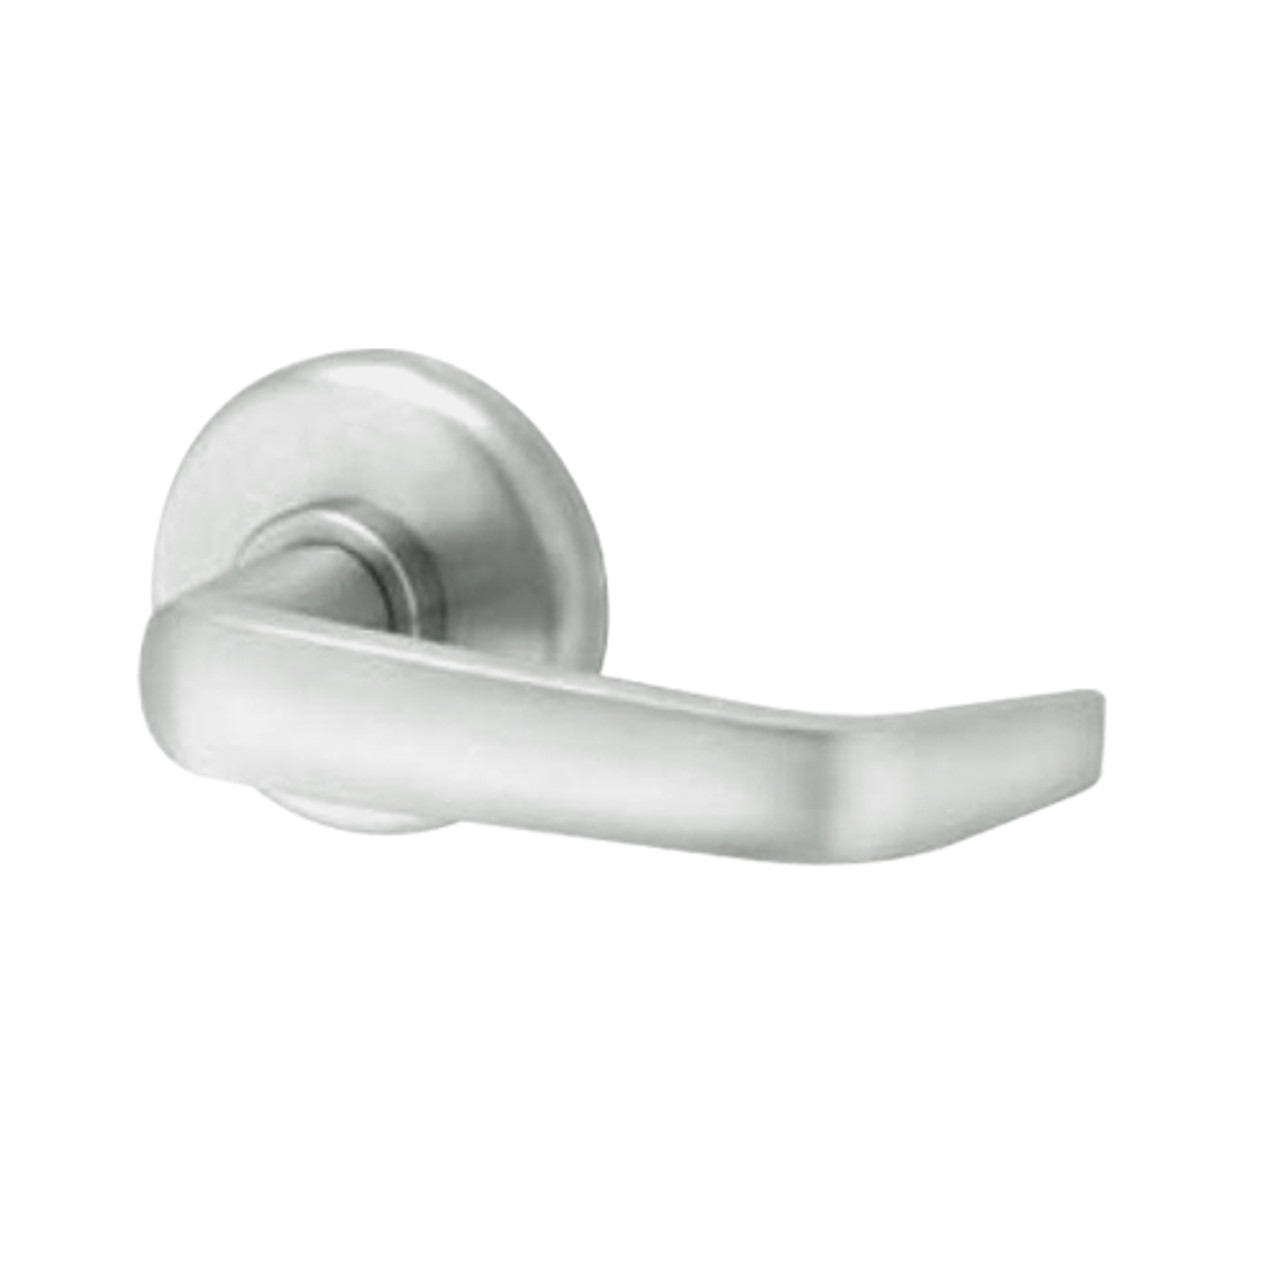 40HTKIS215R619 Best 40H Series Trim Kits Inside Lever w/ turn with Contour w/ Angle Return Style in Satin Nickel